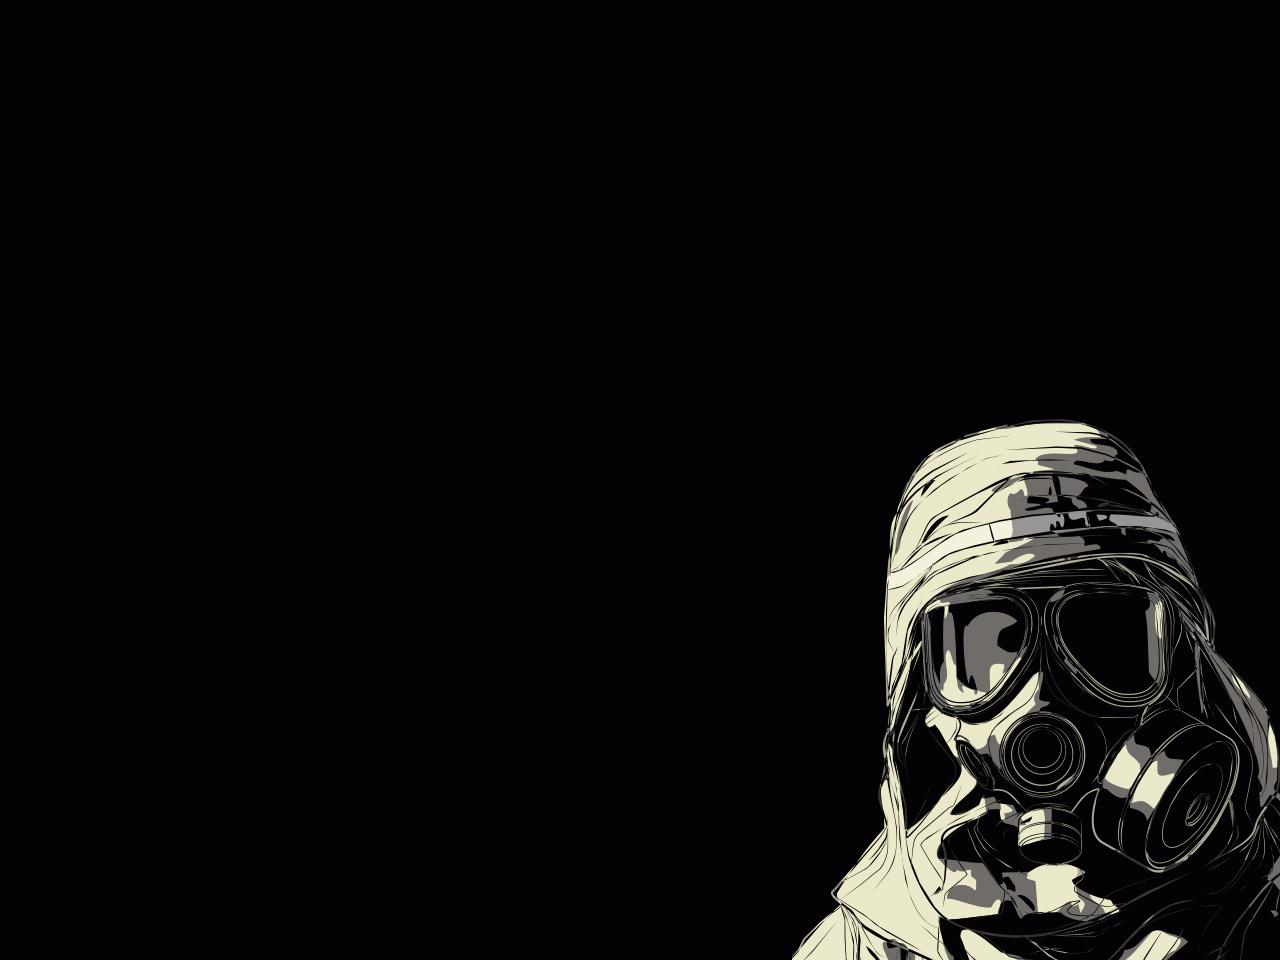 green and black gas mask background hd